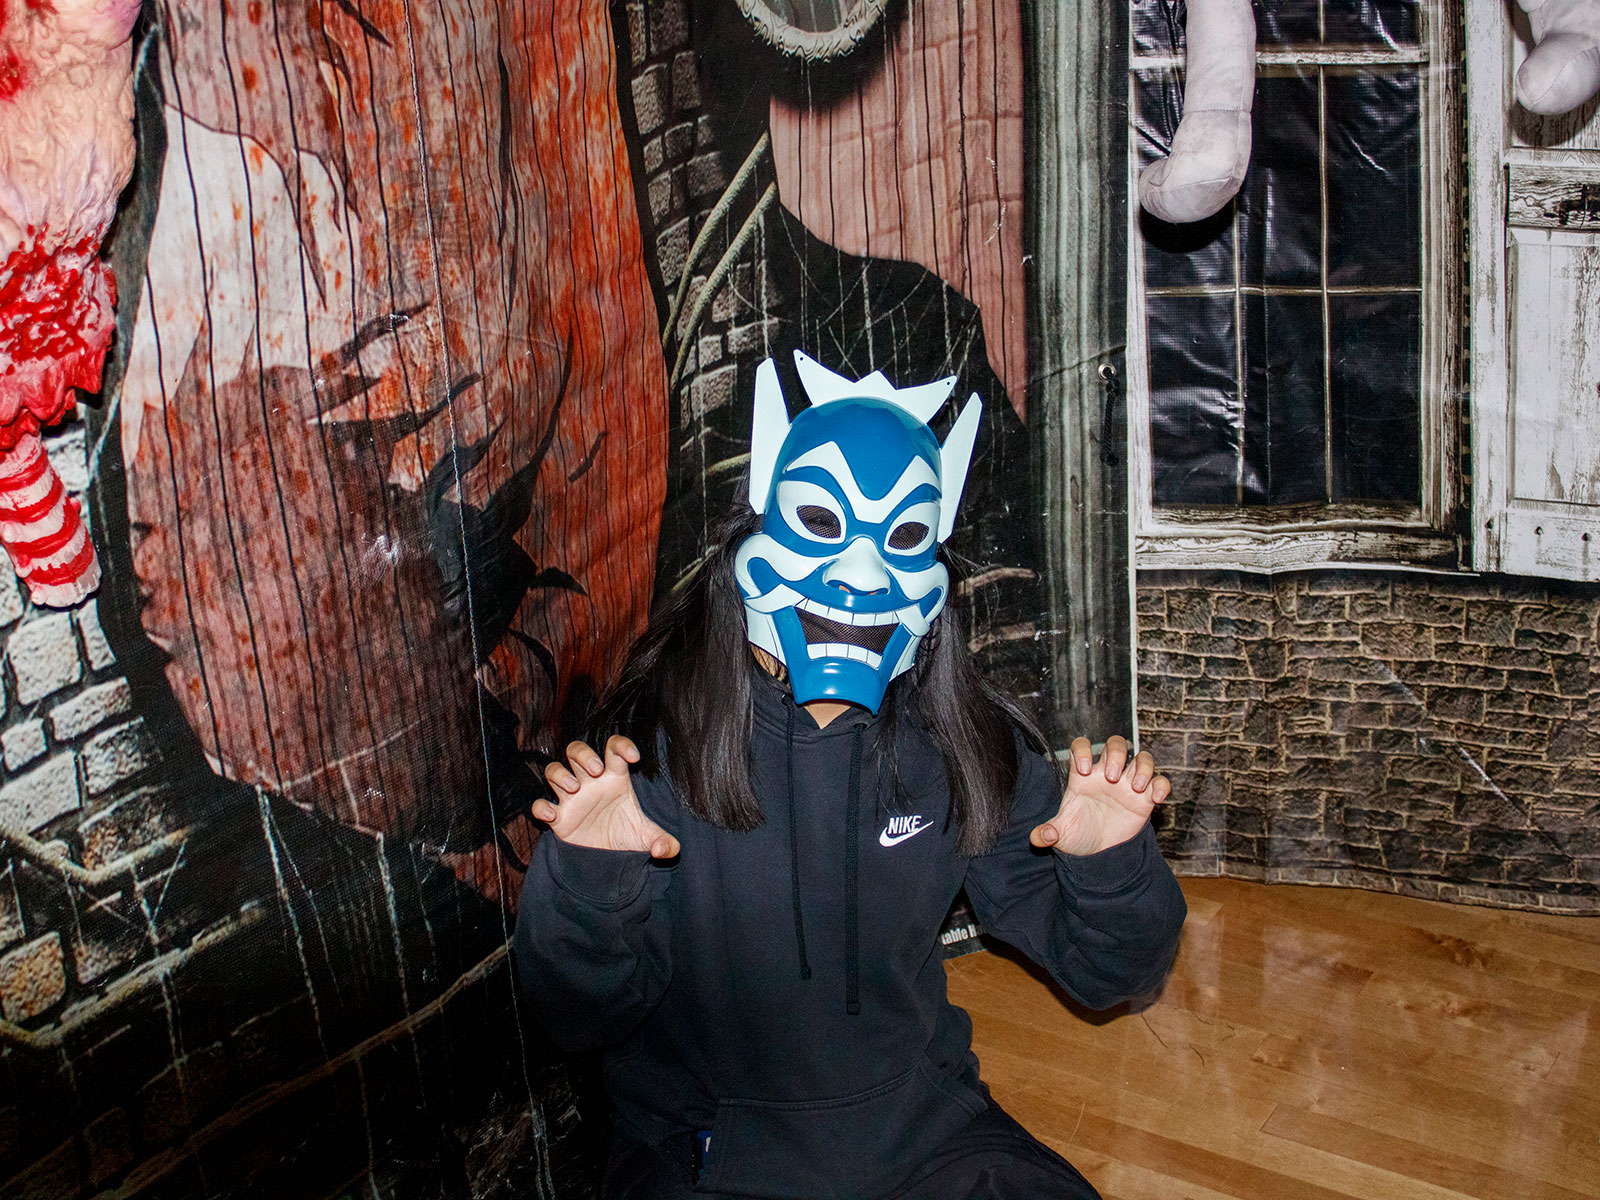 Student poses with a blue full face mask at the haunted house on East Campus on Oct. 20, 2022.